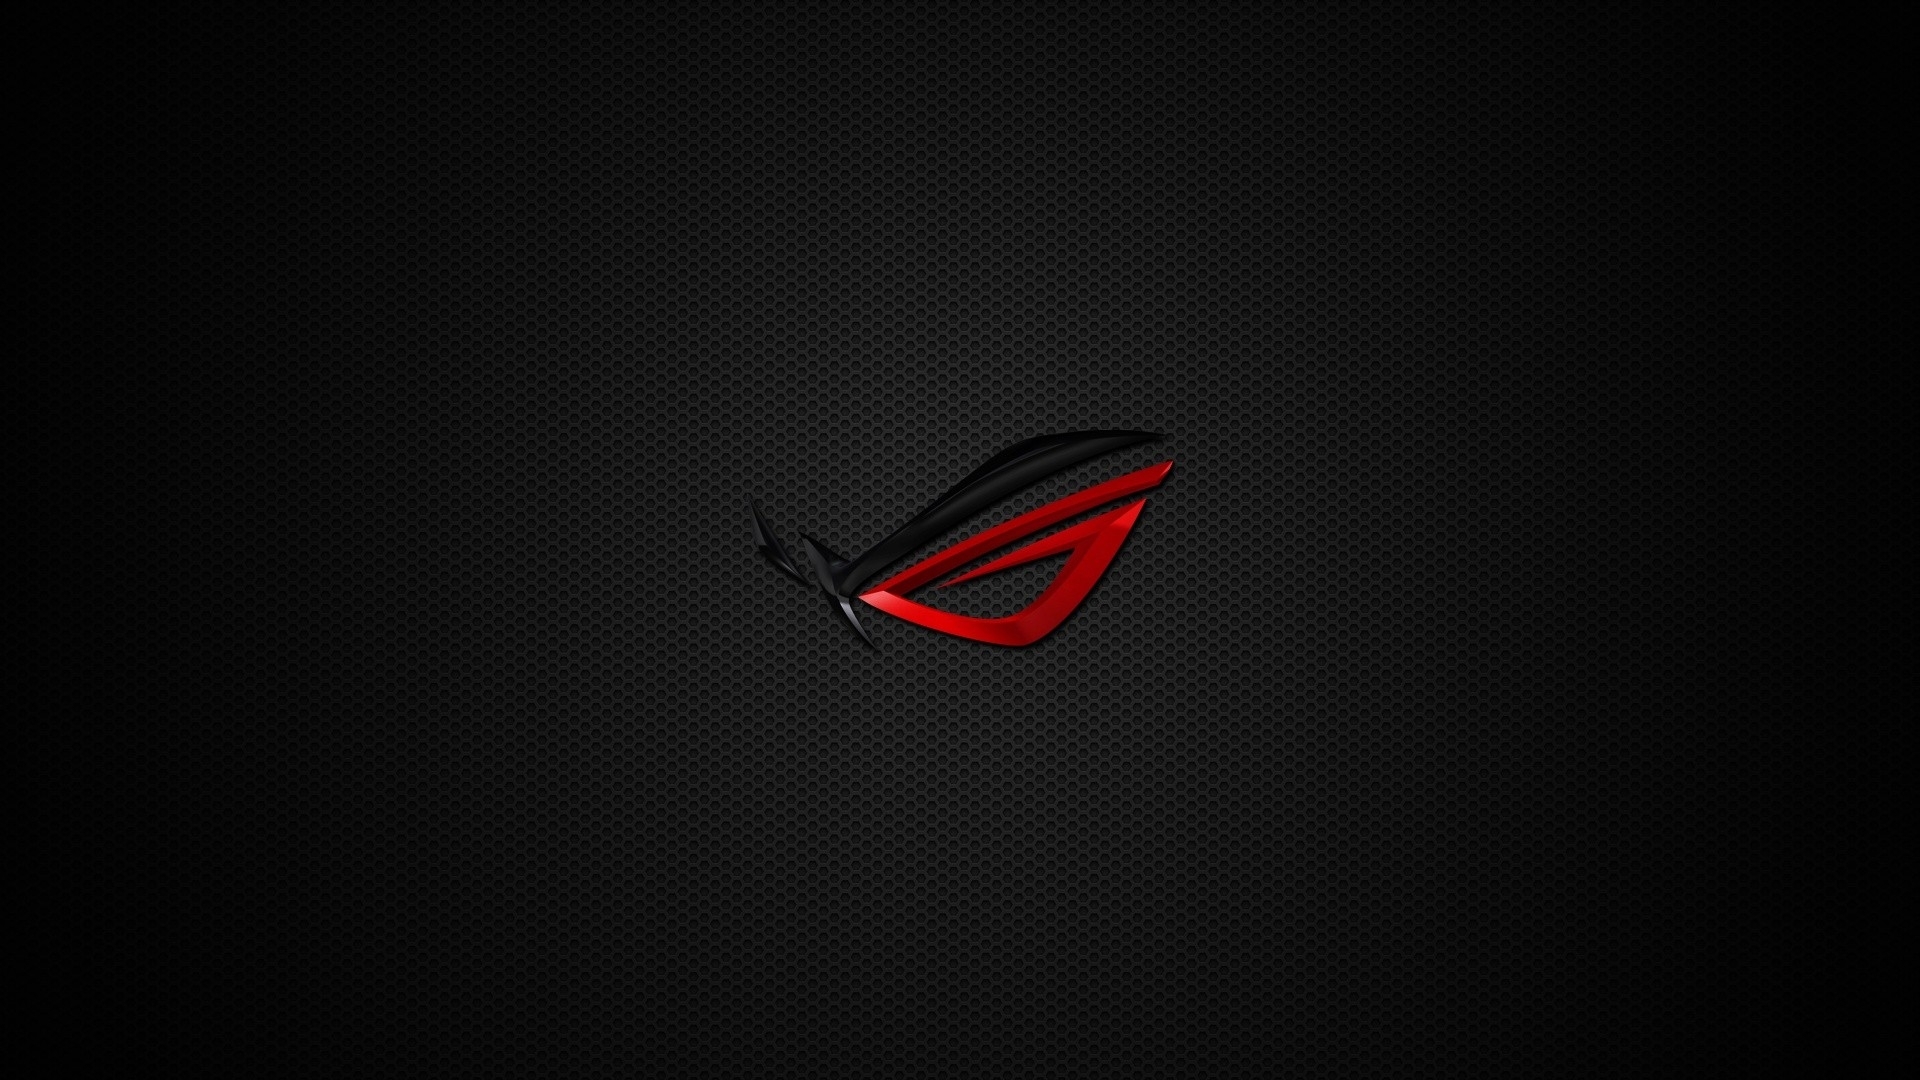 Wallpapers Download 1920x1080 asus rog republic of gamers 1920x1080 1920x1080